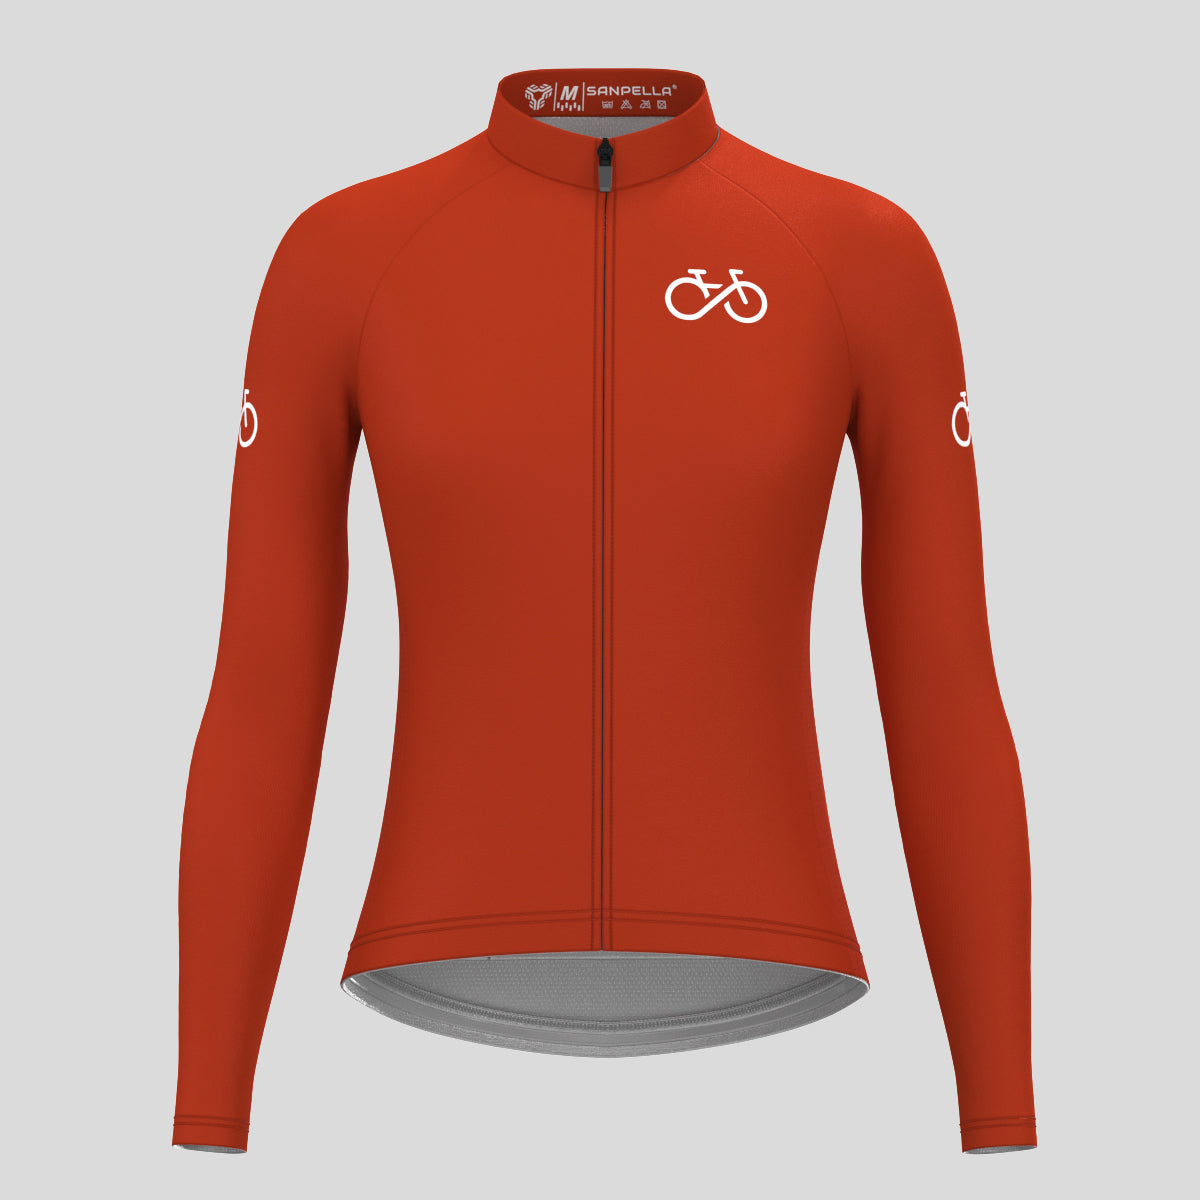 Ride Forever Women's LS Cycling Jersey - Brick